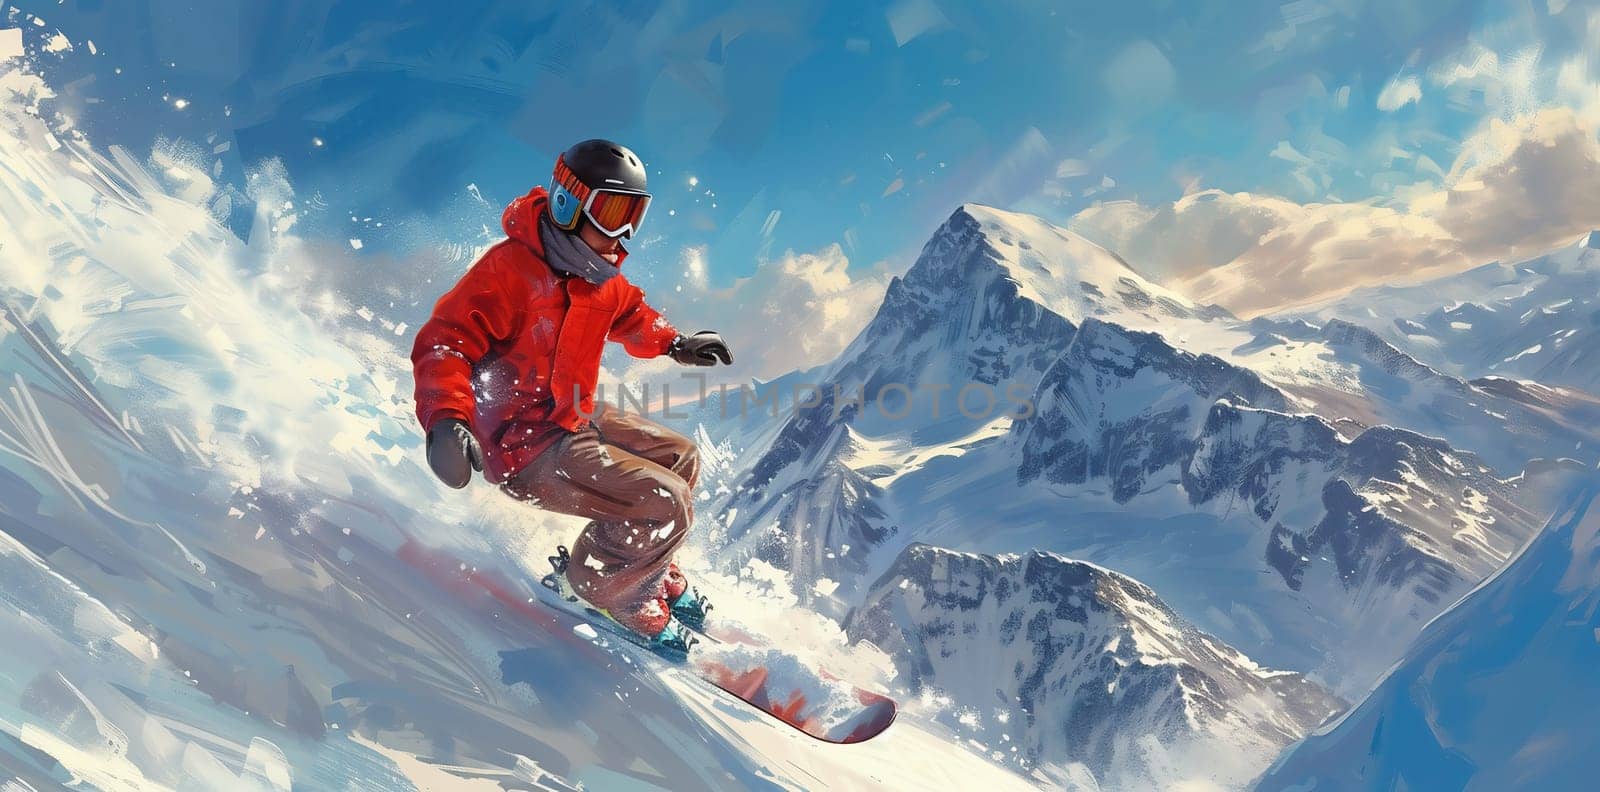 Snowboarder in action. Extreme winter sports. High quality photo